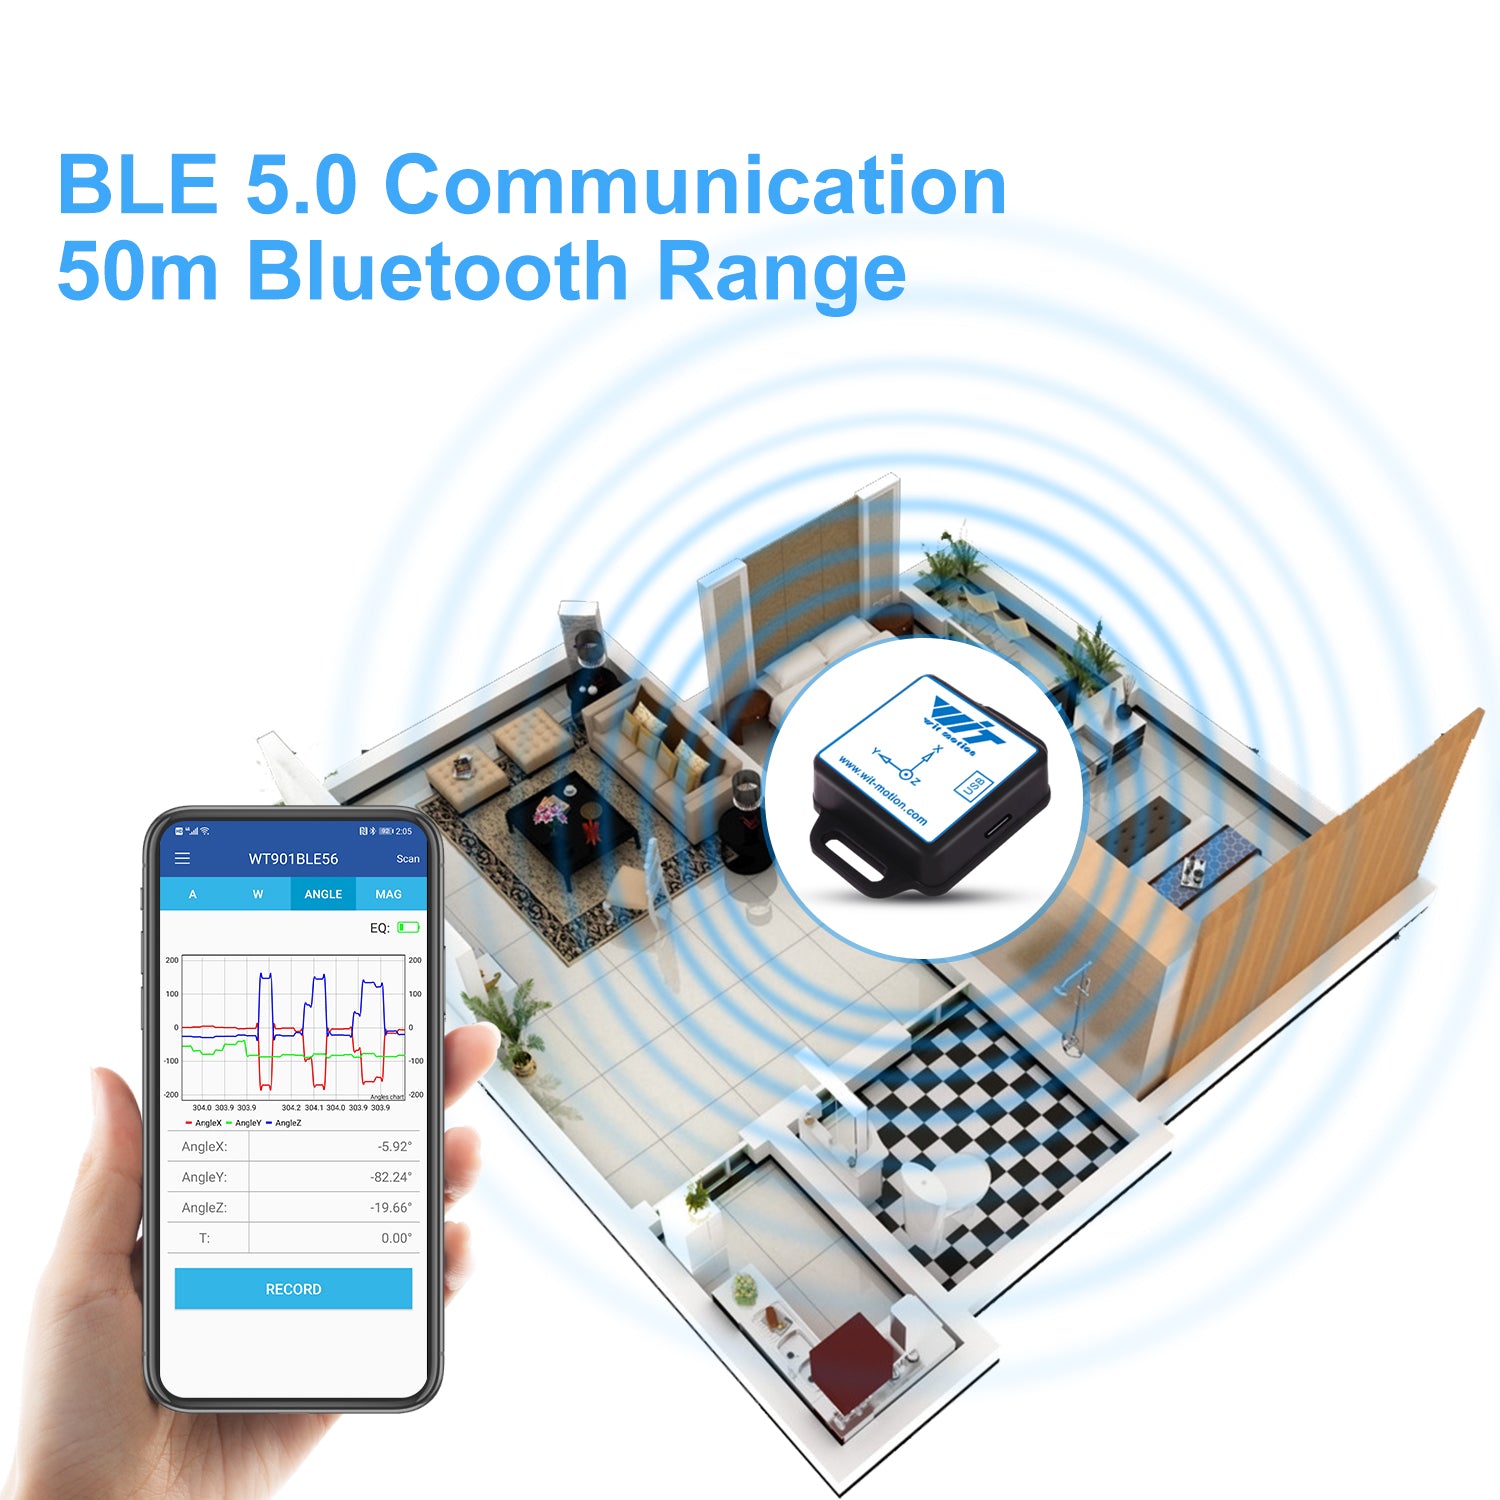 [Bluetooth 5.0 Accelerometer+Inclinometer] WT901BLECL MPU9250 High-Precision 9-axis Gyroscope+Angle(XY 0.05° Accuracy)+Magnetometer with Kalman Filter, Low-Power 3-axis AHRS IMU Sensor for Arduino